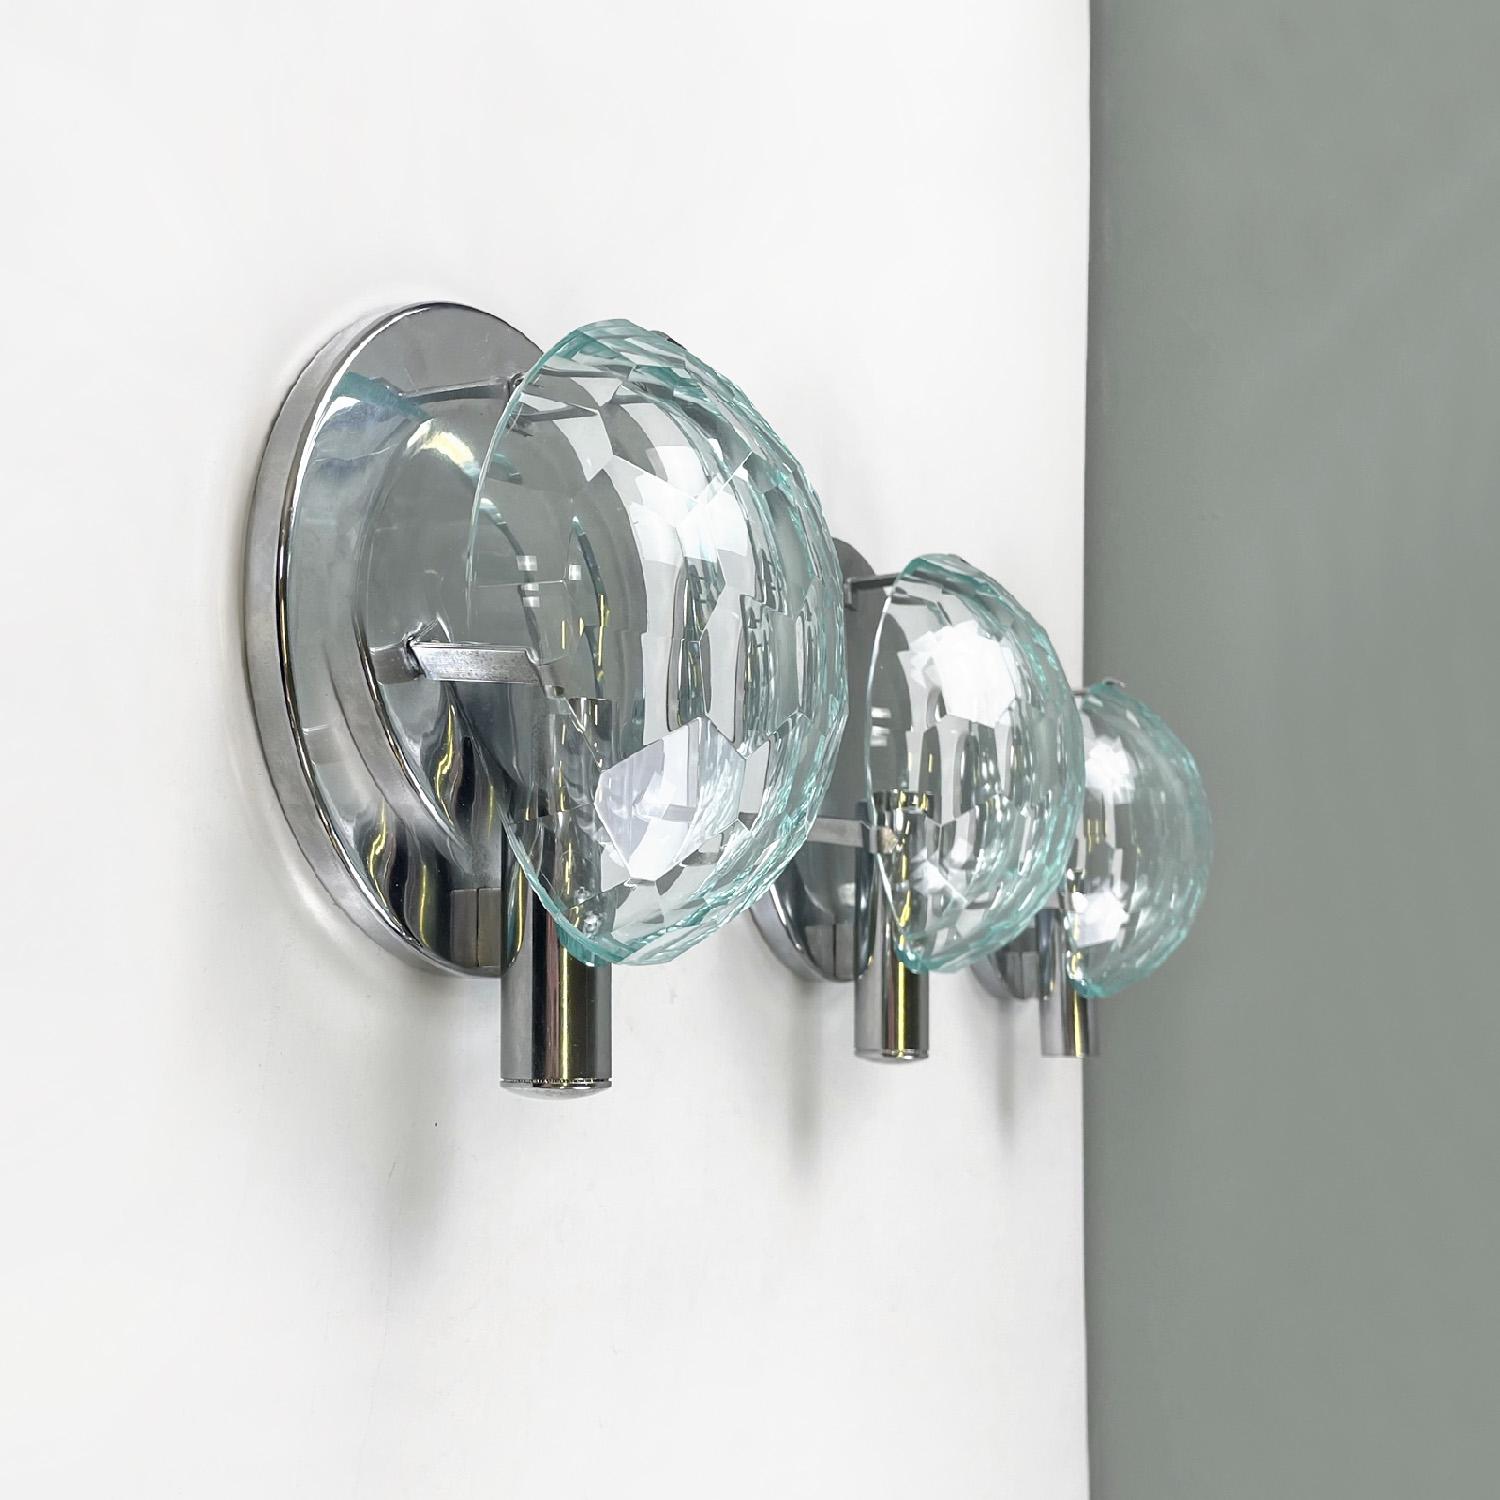 Italian mid-century modern chromed metal and faceted glass wall light, 1960s
Set of three round wall sconces. The circular base corresponds to a cylindrical structure that acts as a lamp holder, all in chromed metal. The glass lampshade is round and